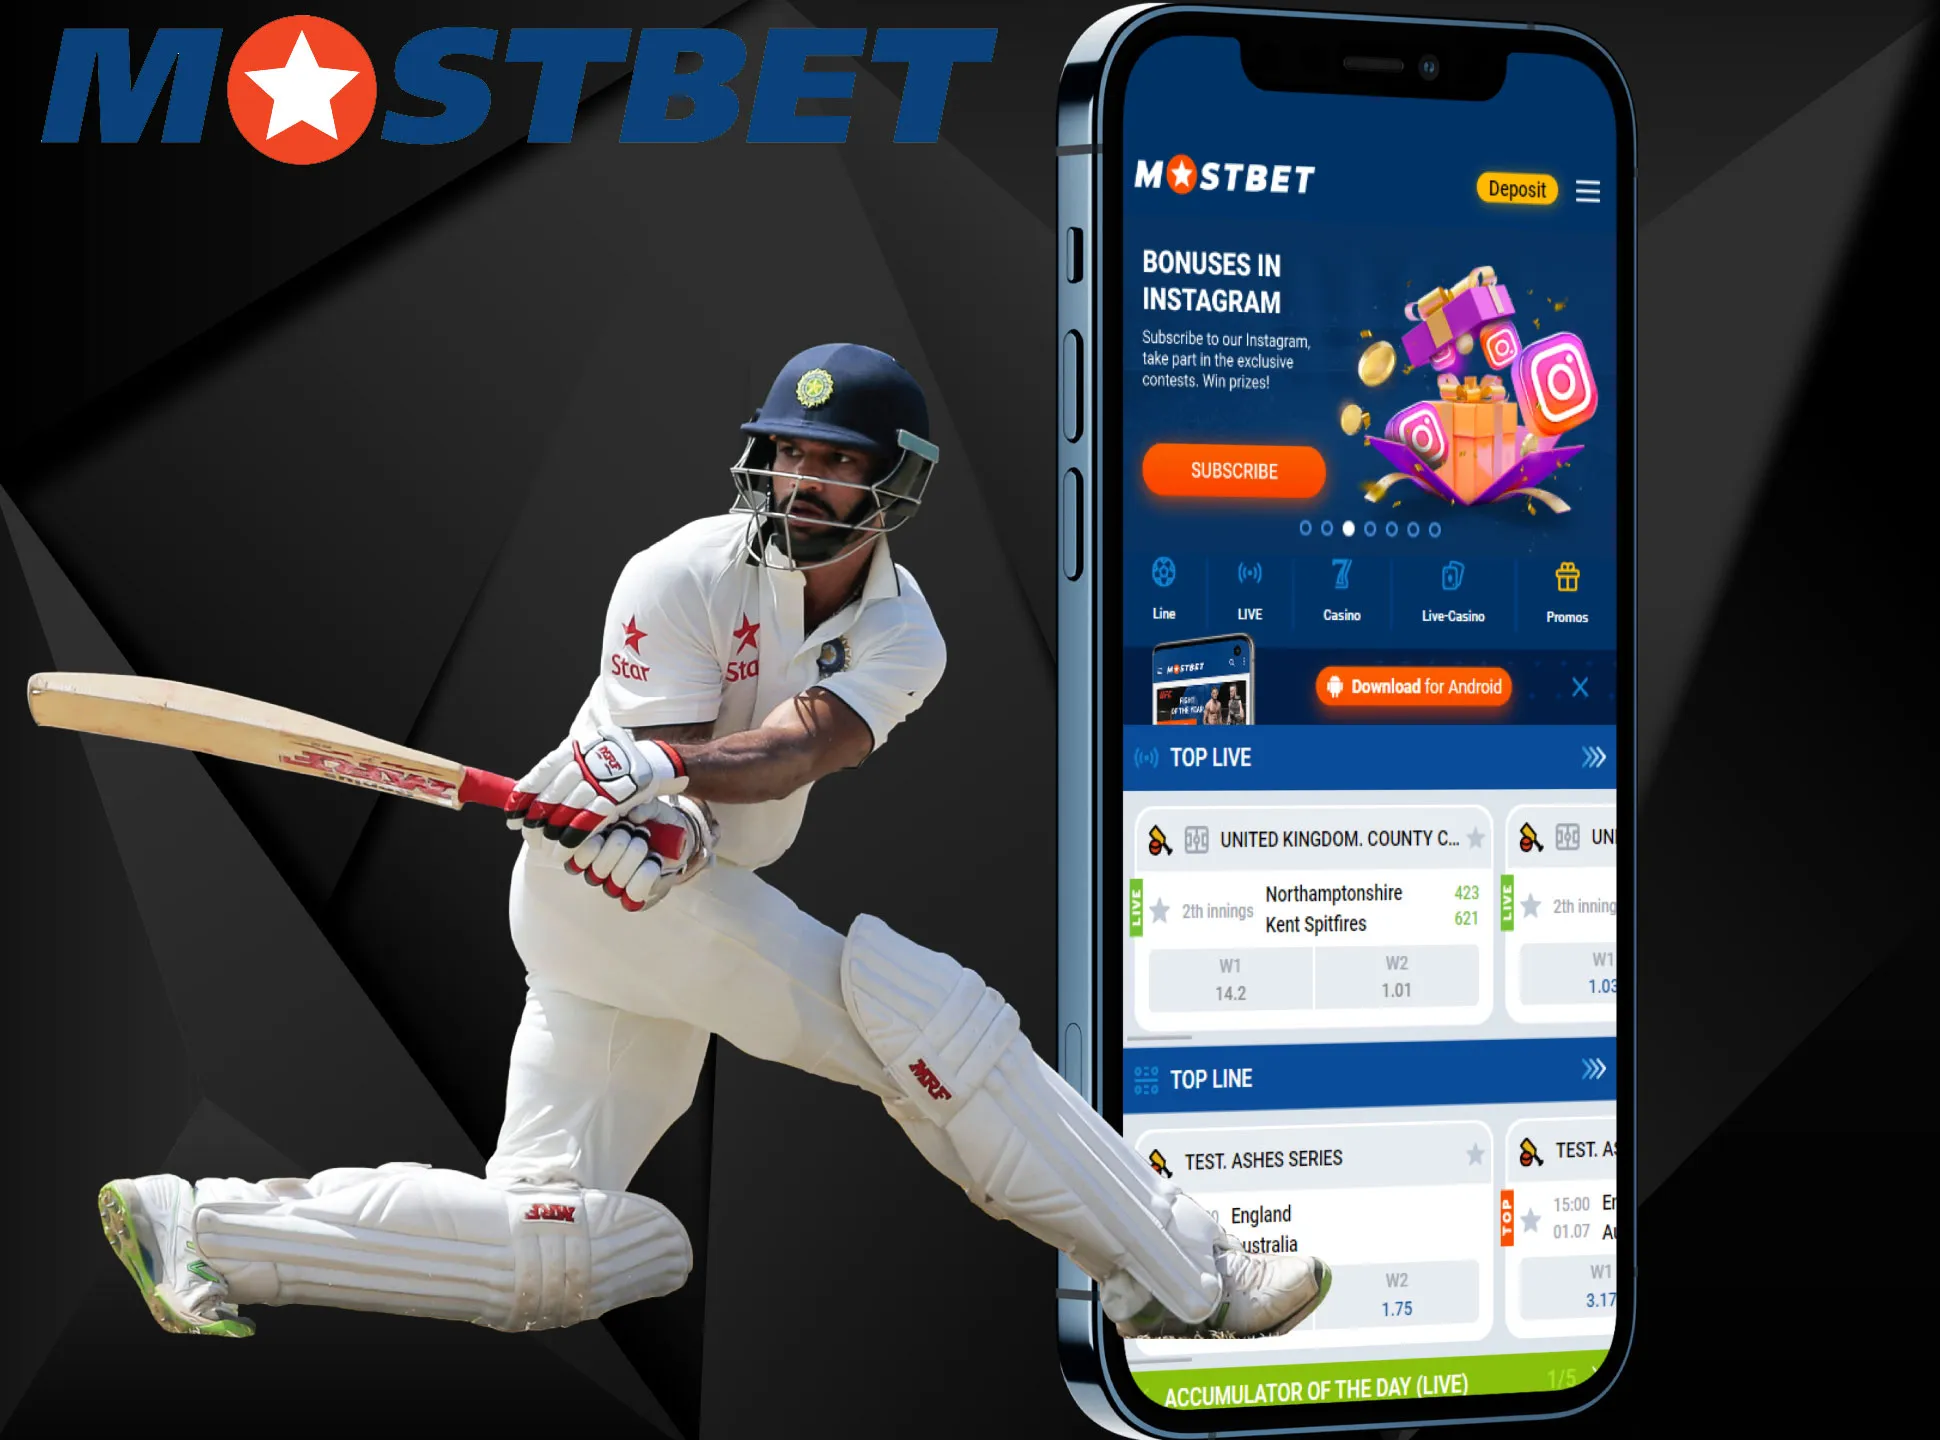 Mostbet app is user-friendly for betting on money.